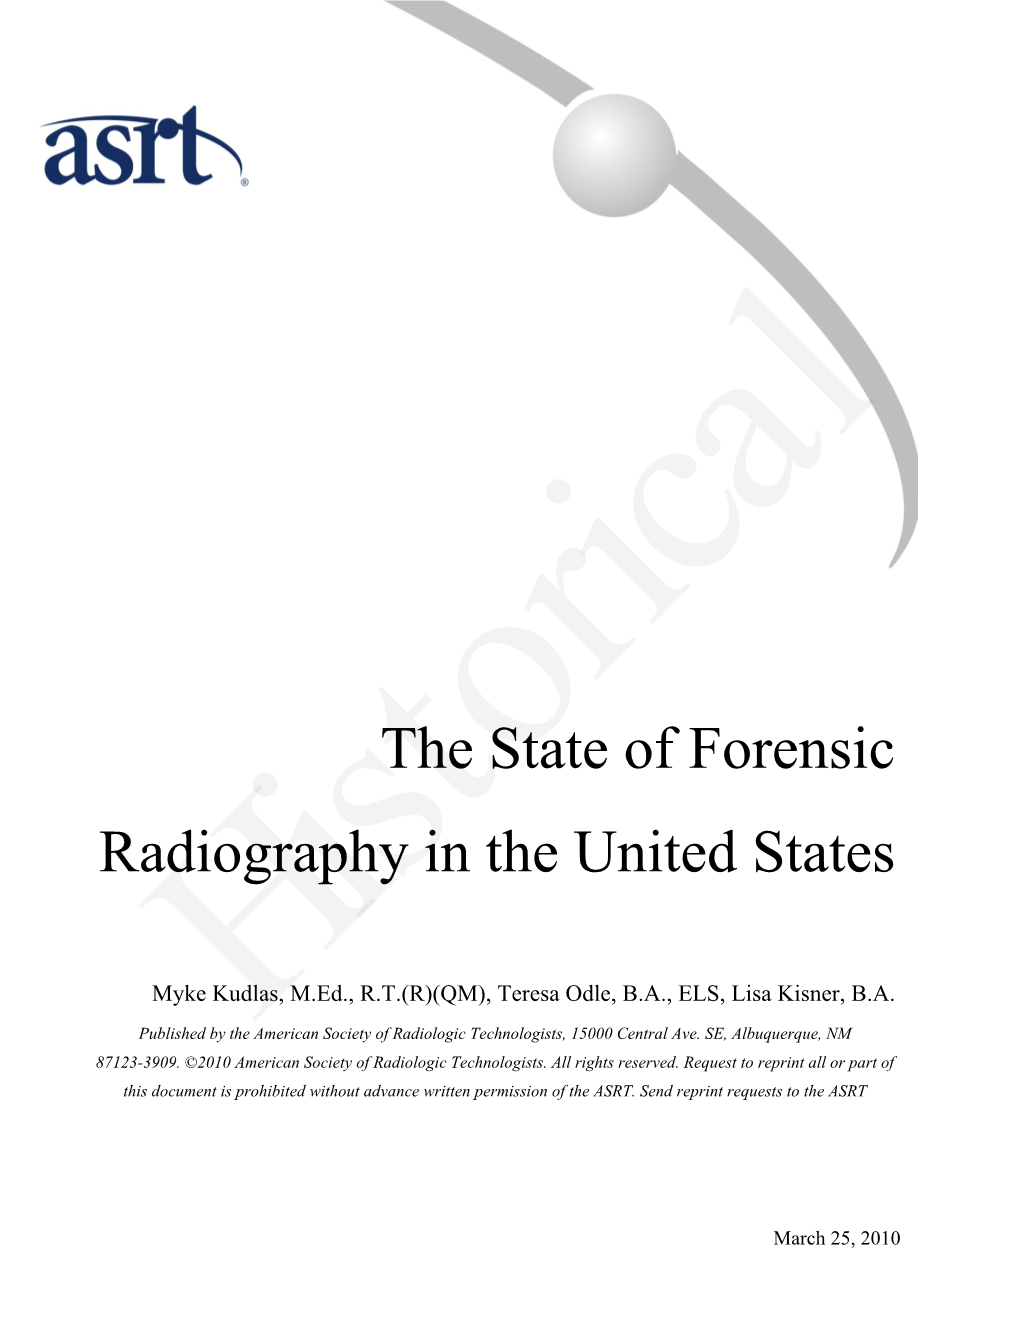 The State of Forensic Radiography in the United States